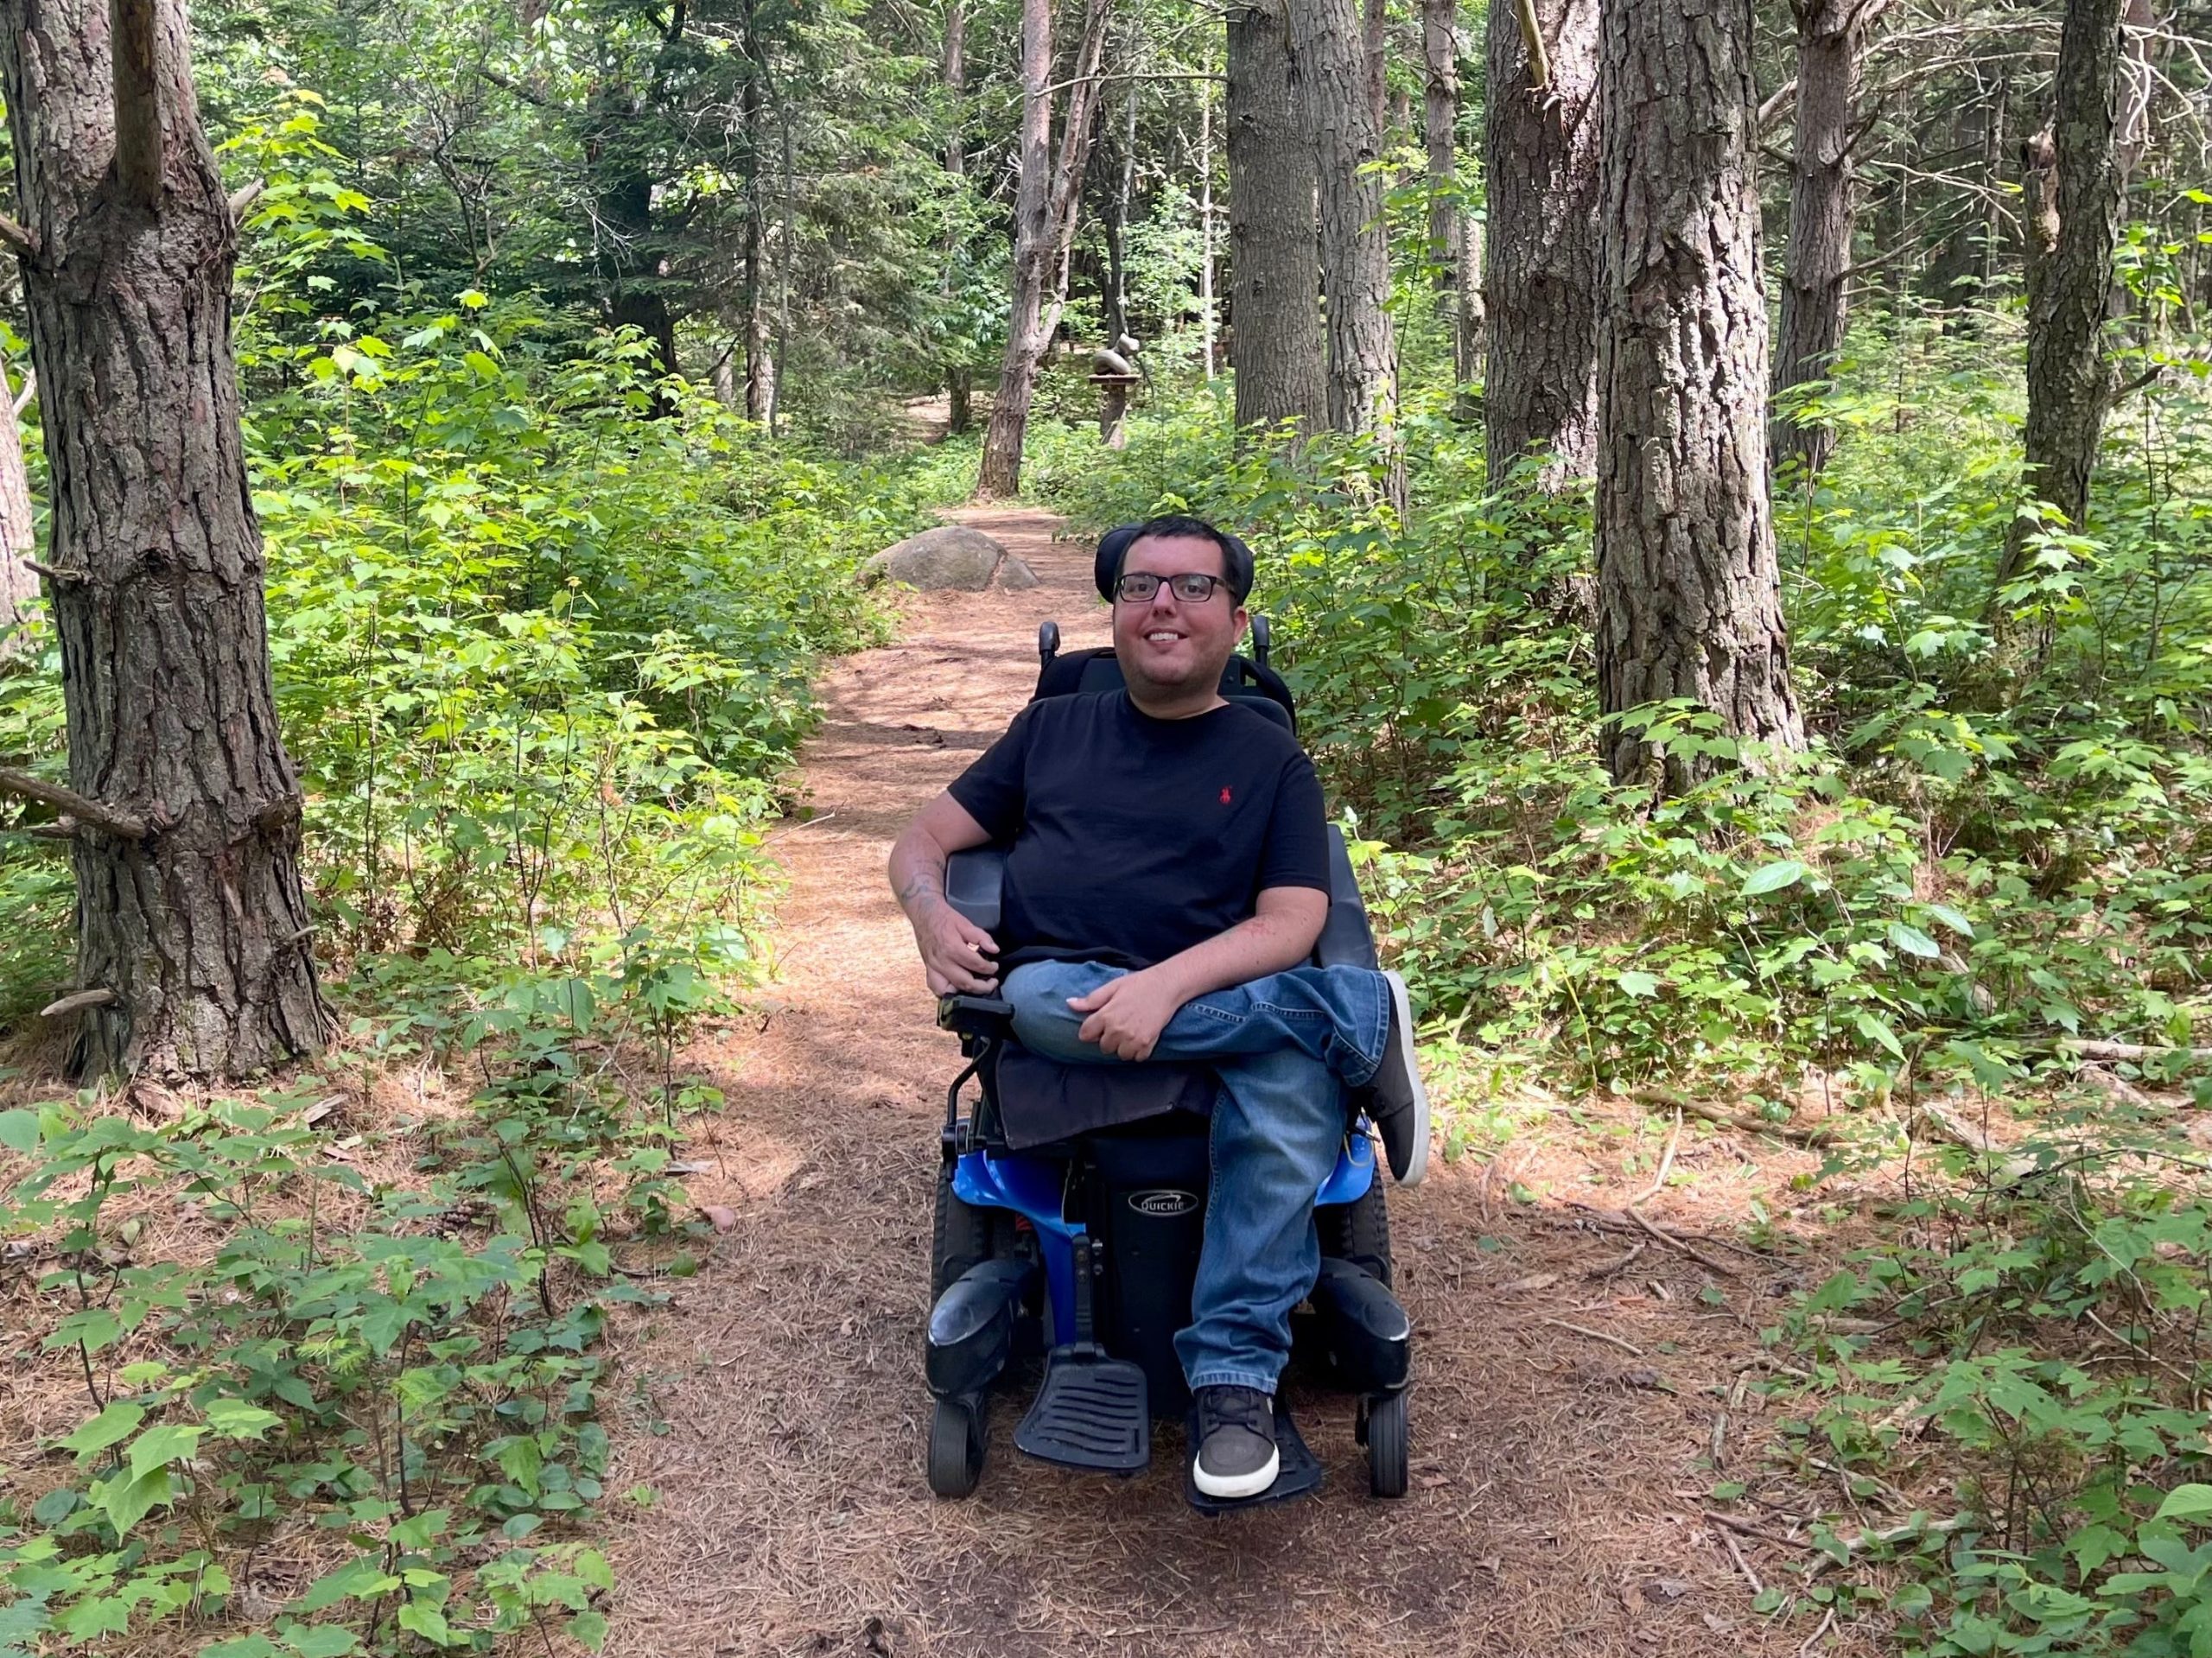 Cory Lee, a wheelchair user, on a nature trail in the Adirondacks.